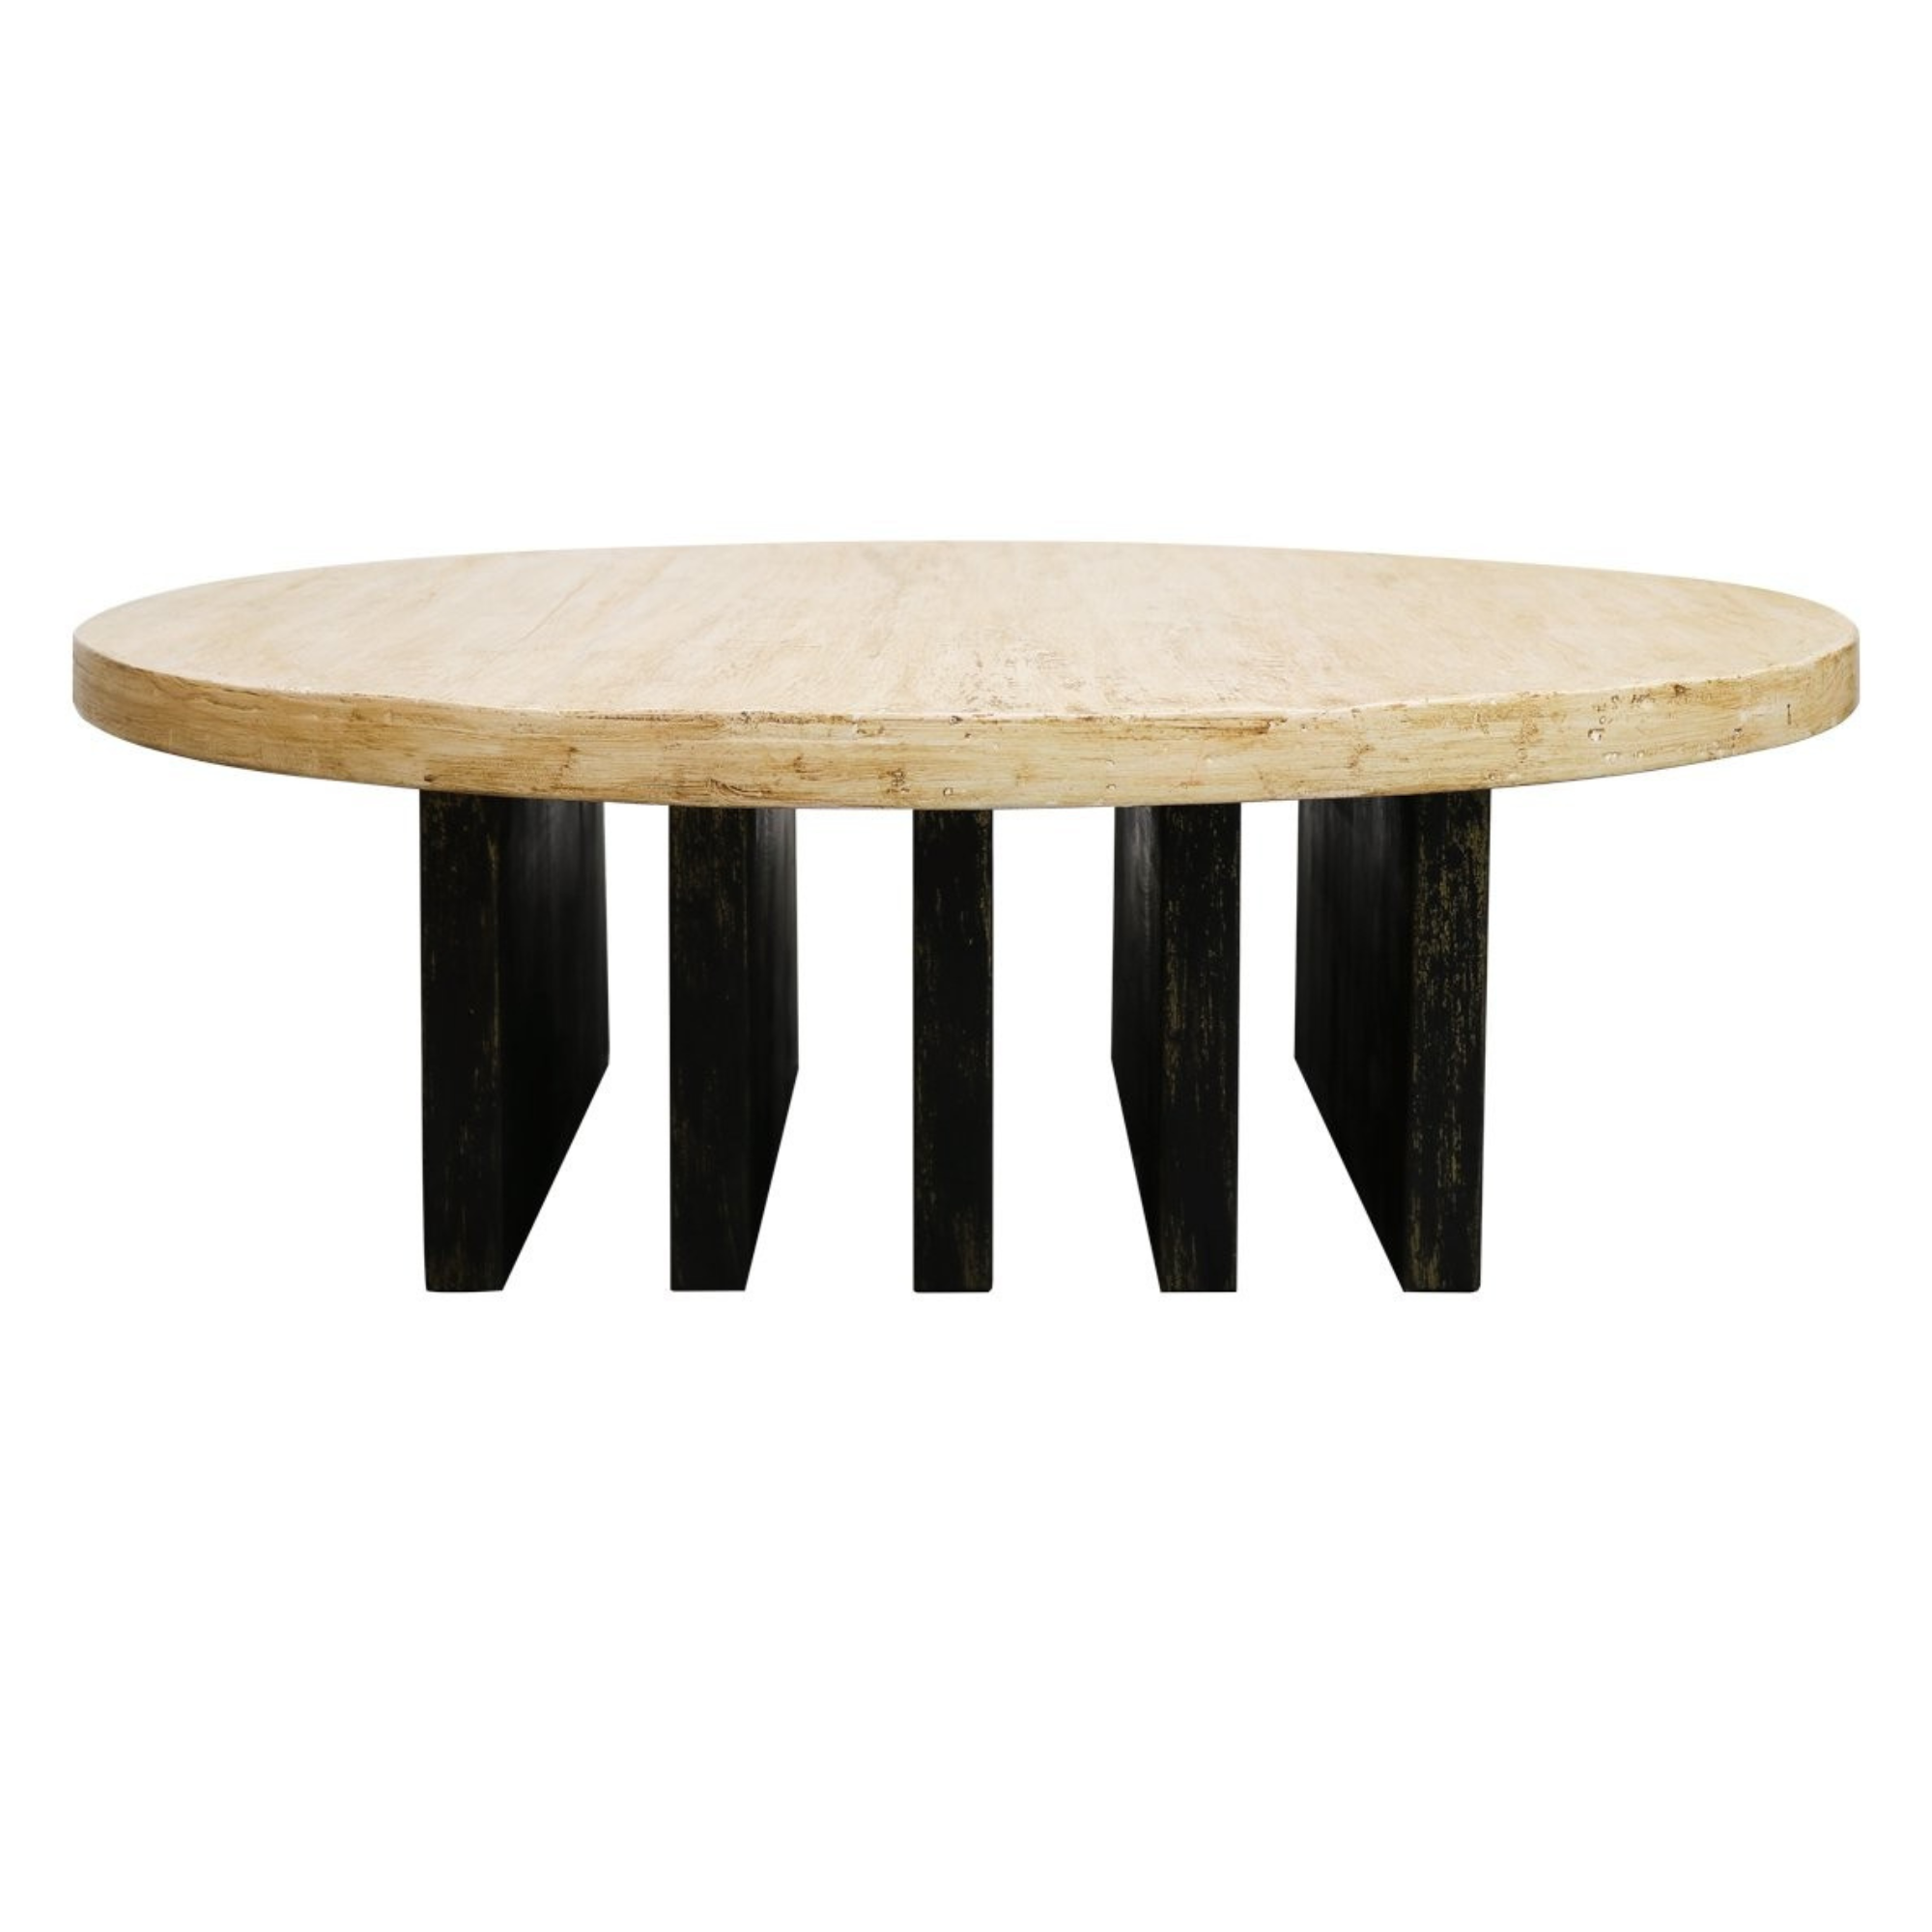 LIMITED EDITION ROUND COFFEE TABLE